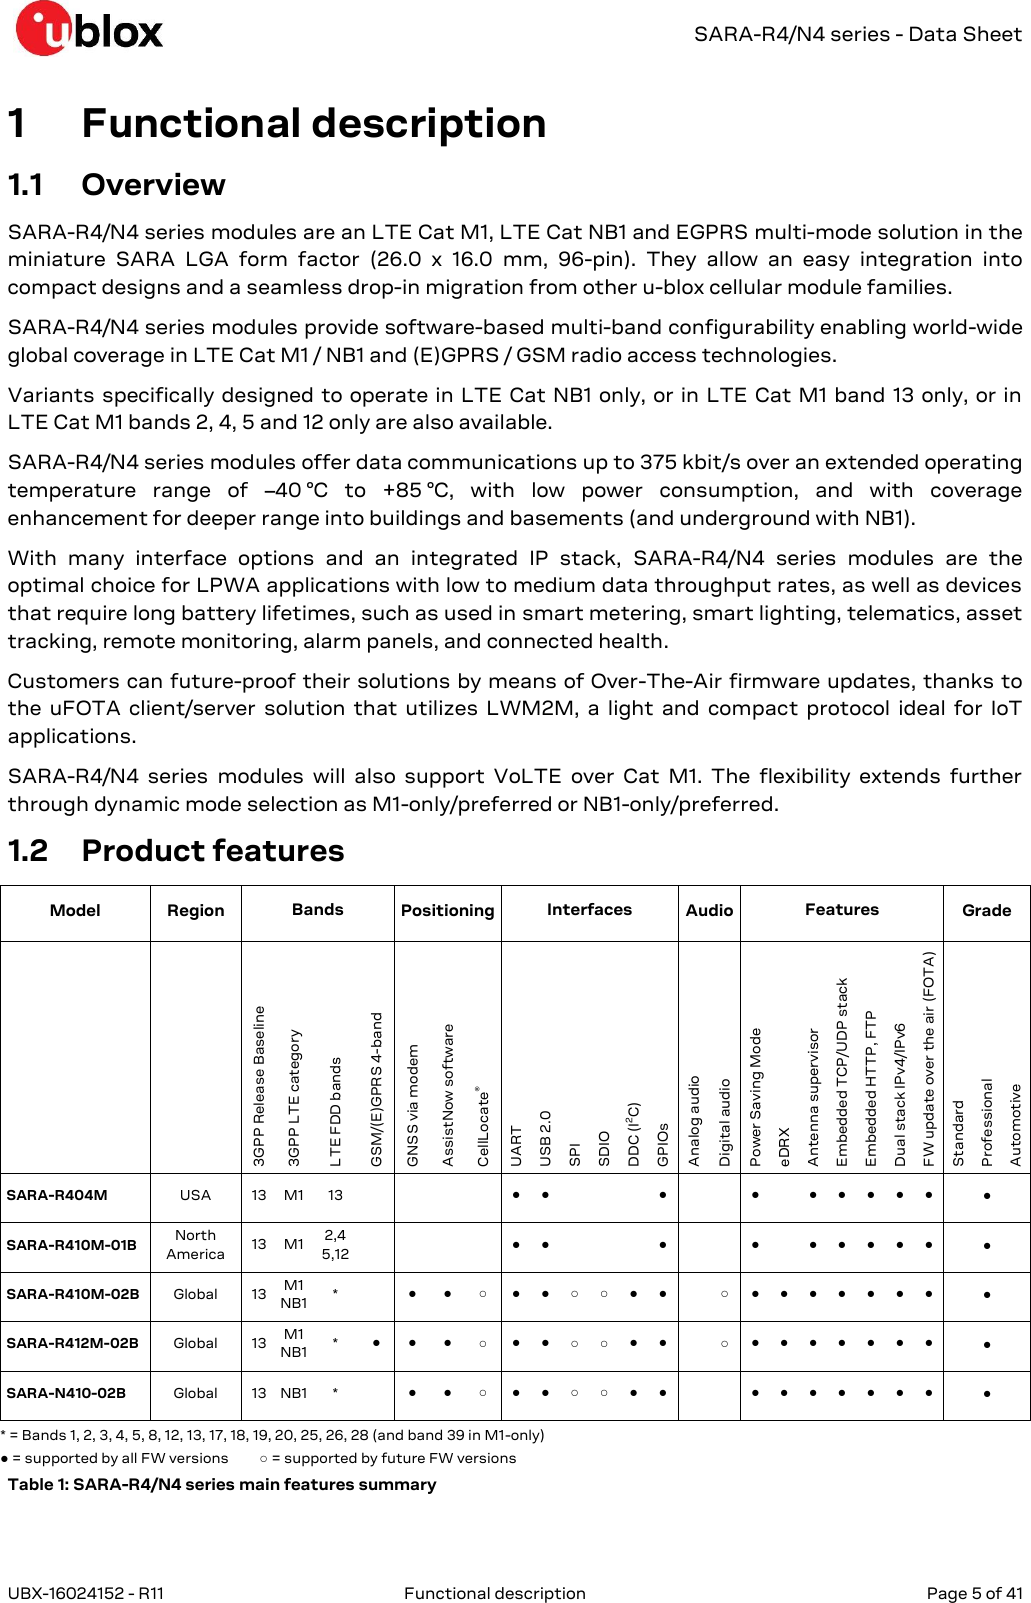   SARA-R4/N4 series - Data Sheet UBX-16024152 - R11  Functional description   Page 5 of 41      1 Functional description 1.1 Overview SARA-R4/N4 series modules are an LTE Cat M1, LTE Cat NB1 and EGPRS multi-mode solution in the miniature  SARA  LGA  form  factor  (26.0  x  16.0  mm,  96-pin).  They  allow  an  easy  integration  into compact designs and a seamless drop-in migration from other u-blox cellular module families. SARA-R4/N4 series modules provide software-based multi-band configurability enabling world-wide global coverage in LTE Cat M1 / NB1 and (E)GPRS / GSM radio access technologies. Variants specifically designed to  operate in  LTE Cat NB1  only, or in  LTE Cat  M1 band 13  only, or  in LTE Cat M1 bands 2, 4, 5 and 12 only are also available. SARA-R4/N4 series modules offer data communications up to 375 kbit/s over an extended operating temperature  range  of  –40 °C  to  +85 °C,  with  low  power  consumption,  and  with  coverage enhancement for deeper range into buildings and basements (and underground with NB1). With  many  interface  options  and  an  integrated  IP  stack,  SARA-R4/N4  series  modules  are  the optimal choice for LPWA applications with low to medium data throughput rates, as well as devices that require long battery lifetimes, such as used in smart metering, smart lighting, telematics, asset tracking, remote monitoring, alarm panels, and connected health.  Customers can future-proof their solutions by means of Over-The-Air firmware updates, thanks to the  uFOTA  client/server  solution  that  utilizes  LWM2M,  a  light and  compact  protocol  ideal  for  IoT applications. SARA-R4/N4  series  modules  will  also  support  VoLTE  over  Cat  M1.  The  flexibility  extends  further through dynamic mode selection as M1-only/preferred or NB1-only/preferred.  1.2 Product features Model Region Bands Positioning Interfaces Audio Features Grade   3GPP Release Baseline  3GPP LTE category LTE FDD bands GSM/(E)GPRS 4-band GNSS via modem AssistNow software CellLocate® UART USB 2.0 SPI SDIO DDC (I2C) GPIOs Analog audio Digital audio  Power Saving Mode eDRX Antenna supervisor Embedded TCP/UDP stack Embedded HTTP, FTP Dual stack IPv4/IPv6 FW update over the air (FOTA) Standard Professional Automotive SARA-R404M USA 13 M1 13     ● ●    ●   ●  ● ● ● ● ●  ●  SARA-R410M-01B North America 13 M1 2,4 5,12     ● ●    ●   ●  ● ● ● ● ●  ●  SARA-R410M-02B Global 13 M1 NB1 *  ● ● ○ ● ● ○ ○ ● ●  ○ ● ● ● ● ● ● ●  ●  SARA-R412M-02B Global 13 M1 NB1 * ● ● ● ○ ● ● ○ ○ ● ●  ○ ● ● ● ● ● ● ●  ●  SARA-N410-02B Global 13 NB1 *  ● ● ○ ● ● ○ ○ ● ●   ● ● ● ● ● ● ●  ●  * = Bands 1, 2, 3, 4, 5, 8, 12, 13, 17, 18, 19, 20, 25, 26, 28 (and band 39 in M1-only)      ● = supported by all FW versions         ○ = supported by future FW versions Table 1: SARA-R4/N4 series main features summary 